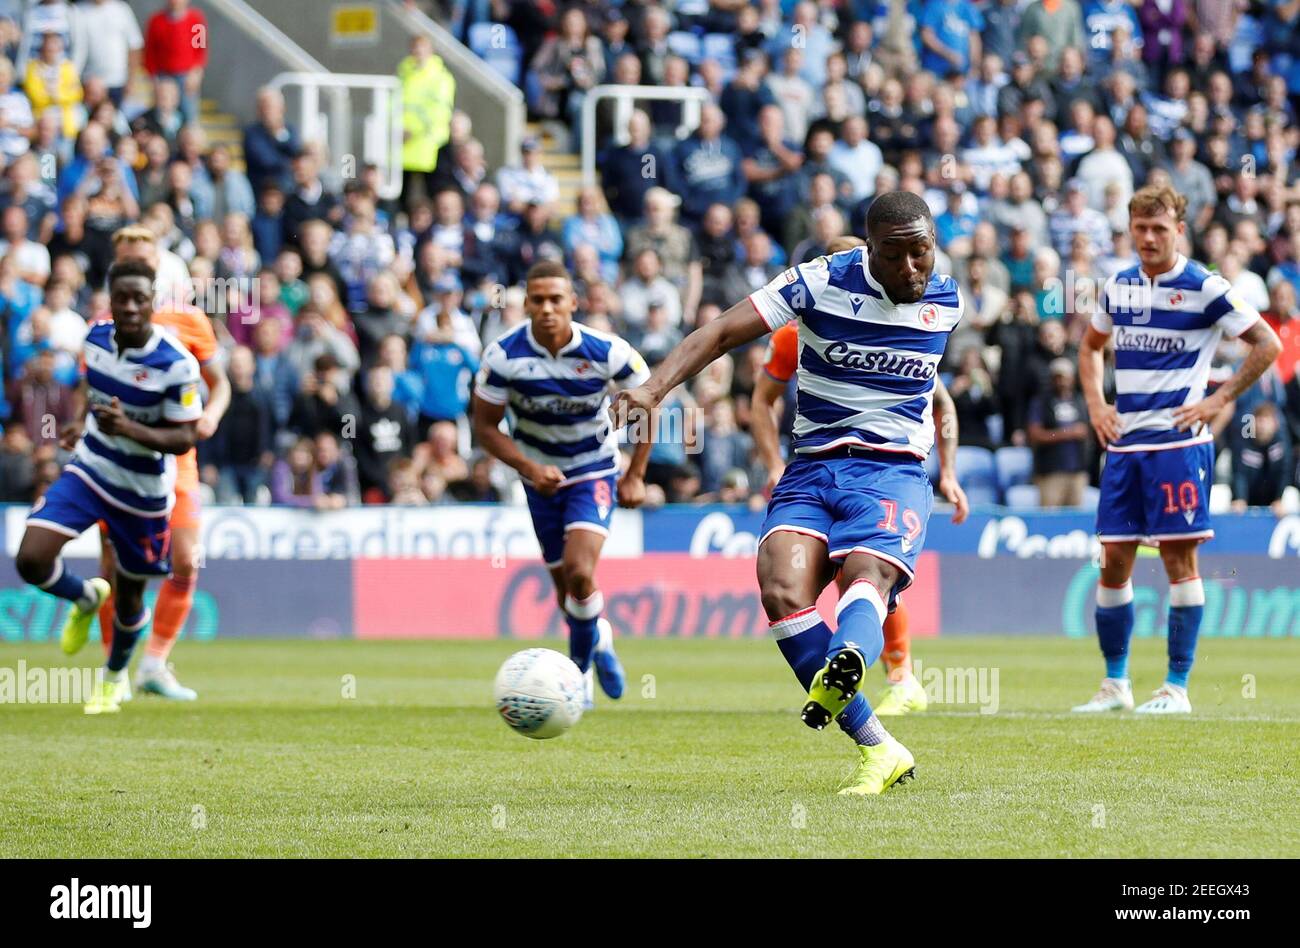 Soccer Football - Championship - Reading v Cardiff City - Madejski Stadium, Reading, Britain - August 18, 2019  Reading's Yakou Miete misses from the penalty spot Action Images/Matthew Childs  EDITORIAL USE ONLY. No use with unauthorized audio, video, data, fixture lists, club/league logos or 'live' services. Online in-match use limited to 75 images, no video emulation. No use in betting, games or single club/league/player publications.  Please contact your account representative for further details. Stock Photo